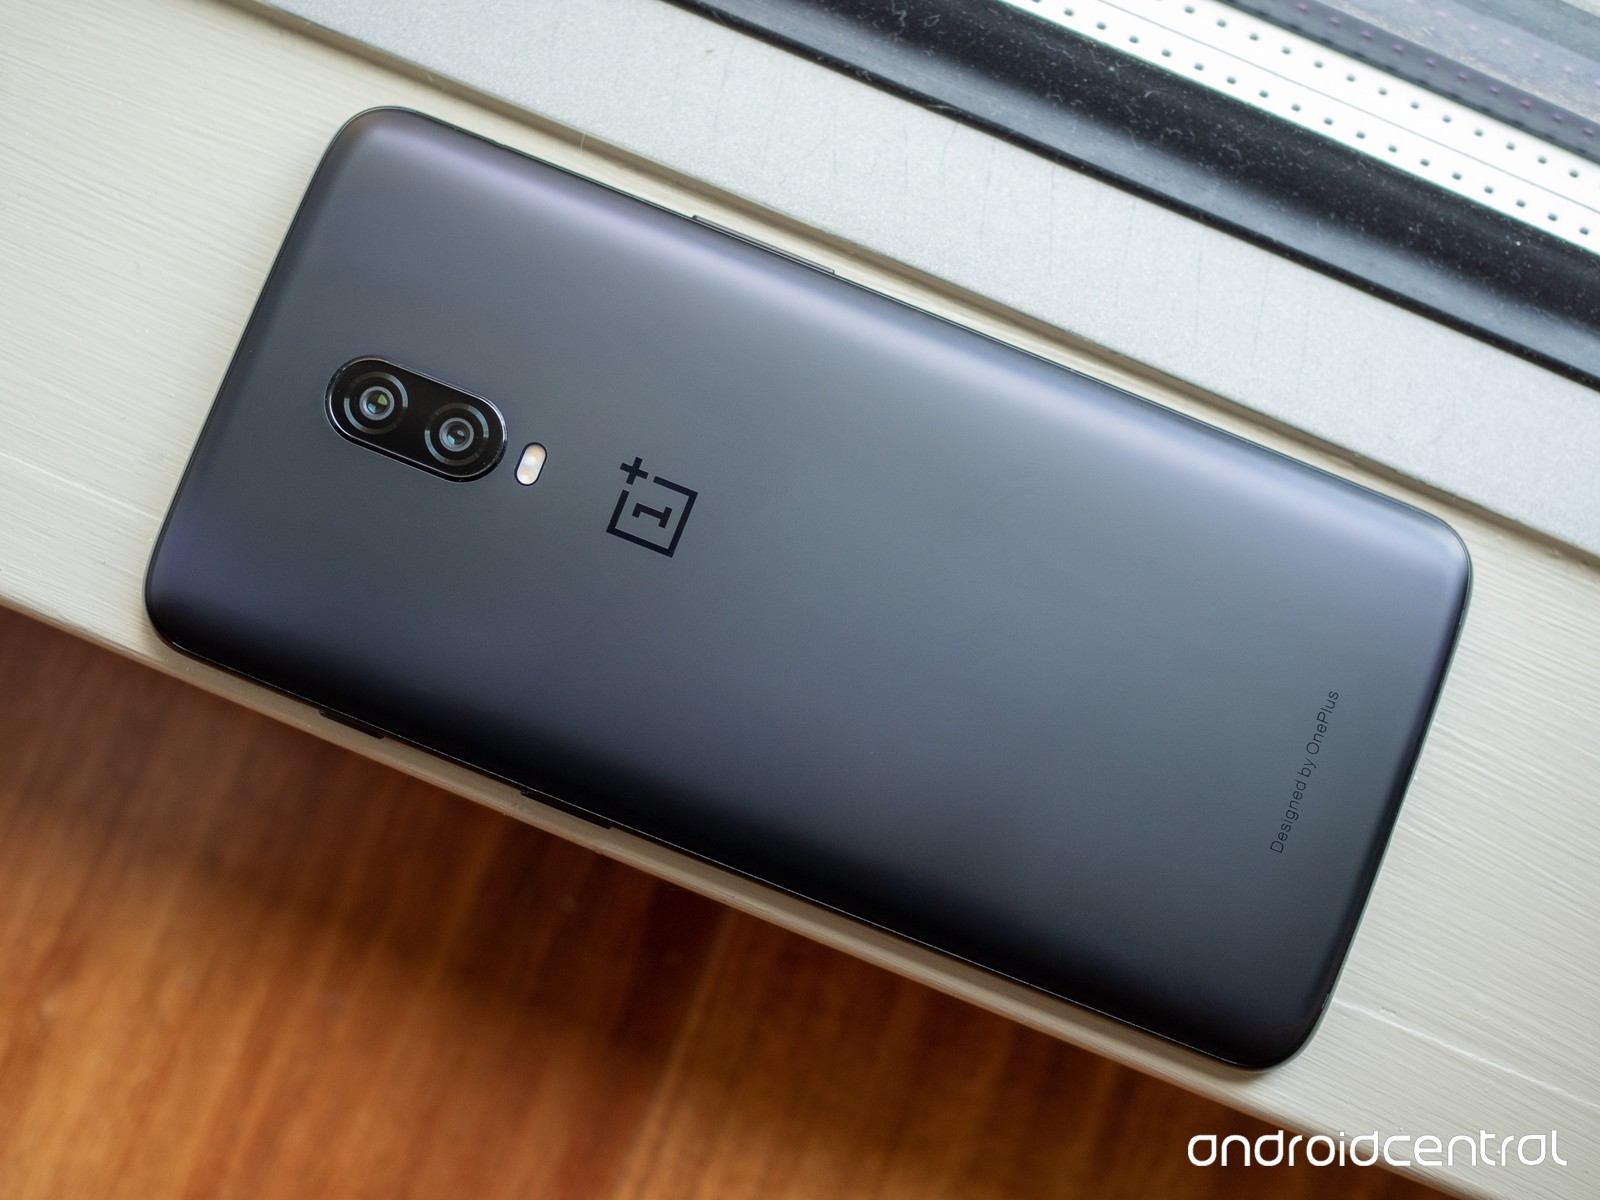 OnePlus 6T comes with frosted glass back susceptible to scratches